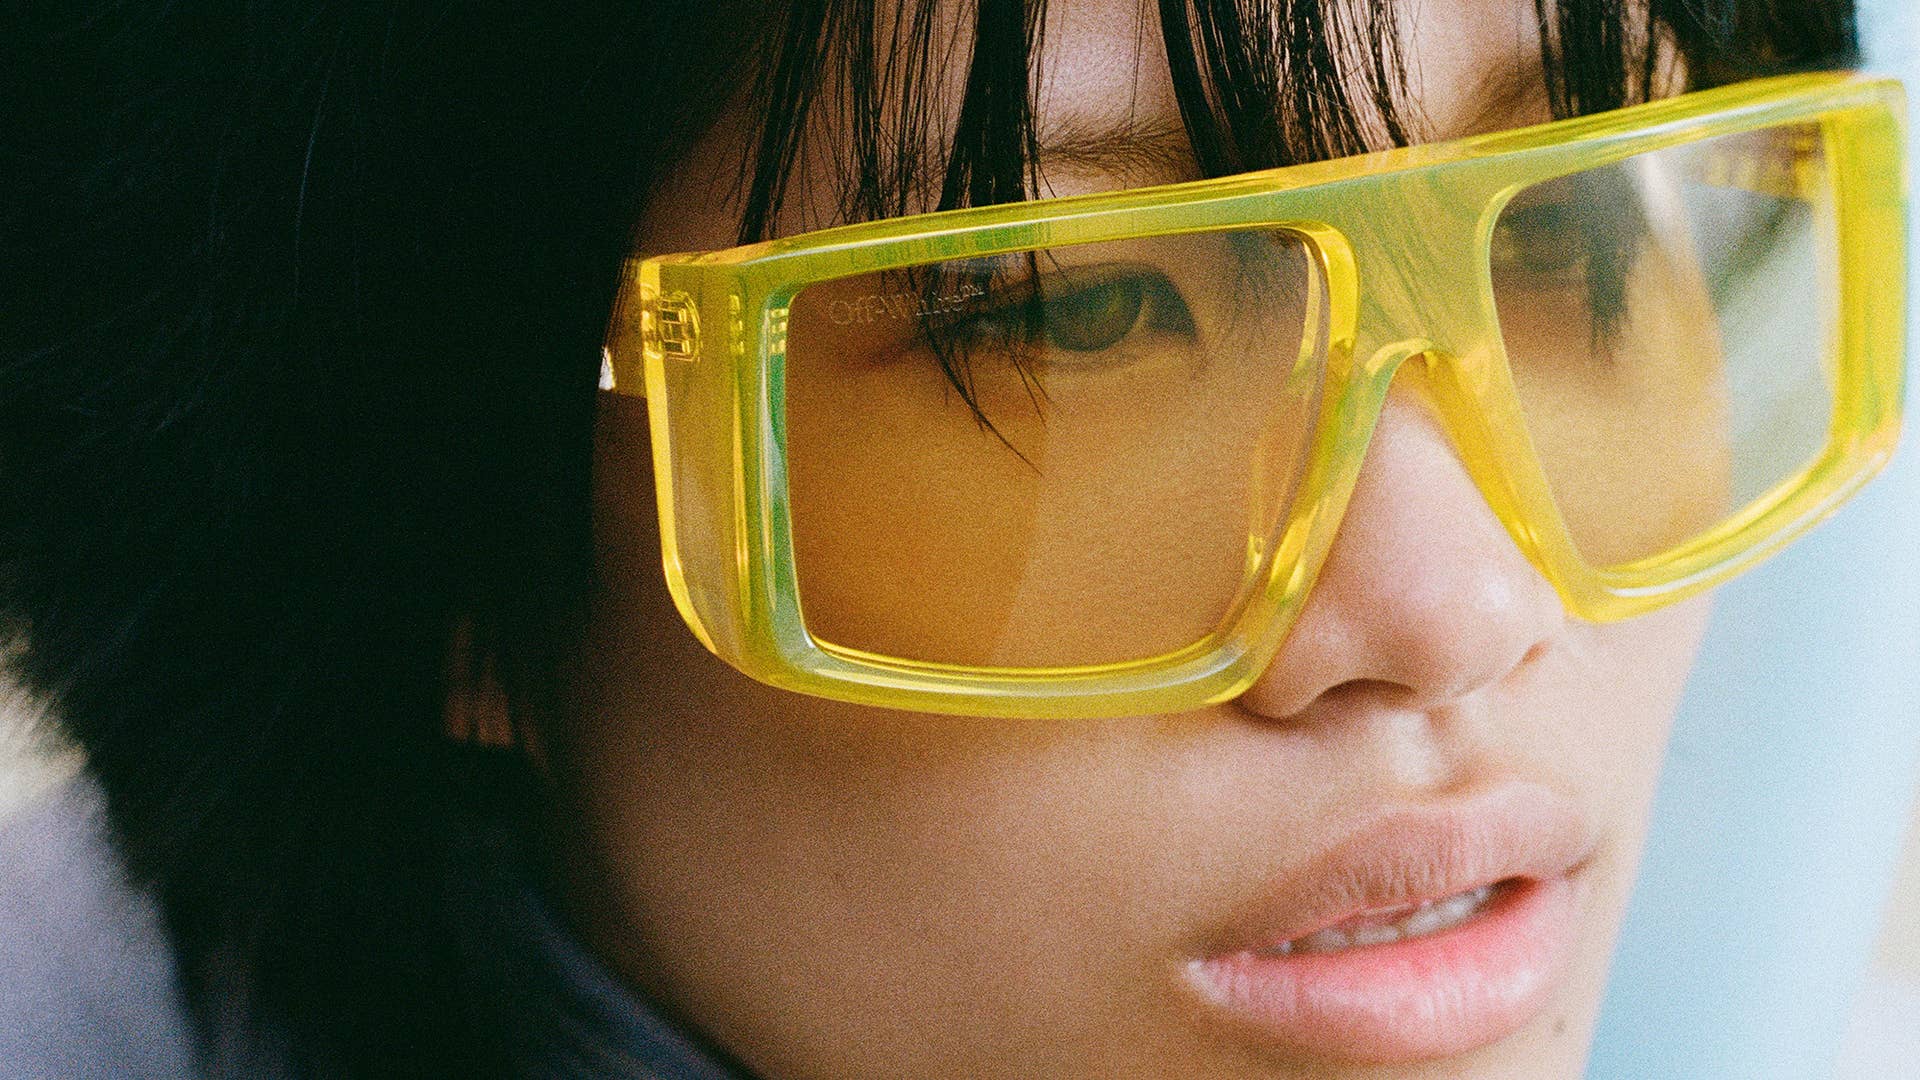 Virgil Abloh's Off-White Launches Label's First Full Eyewear Collection